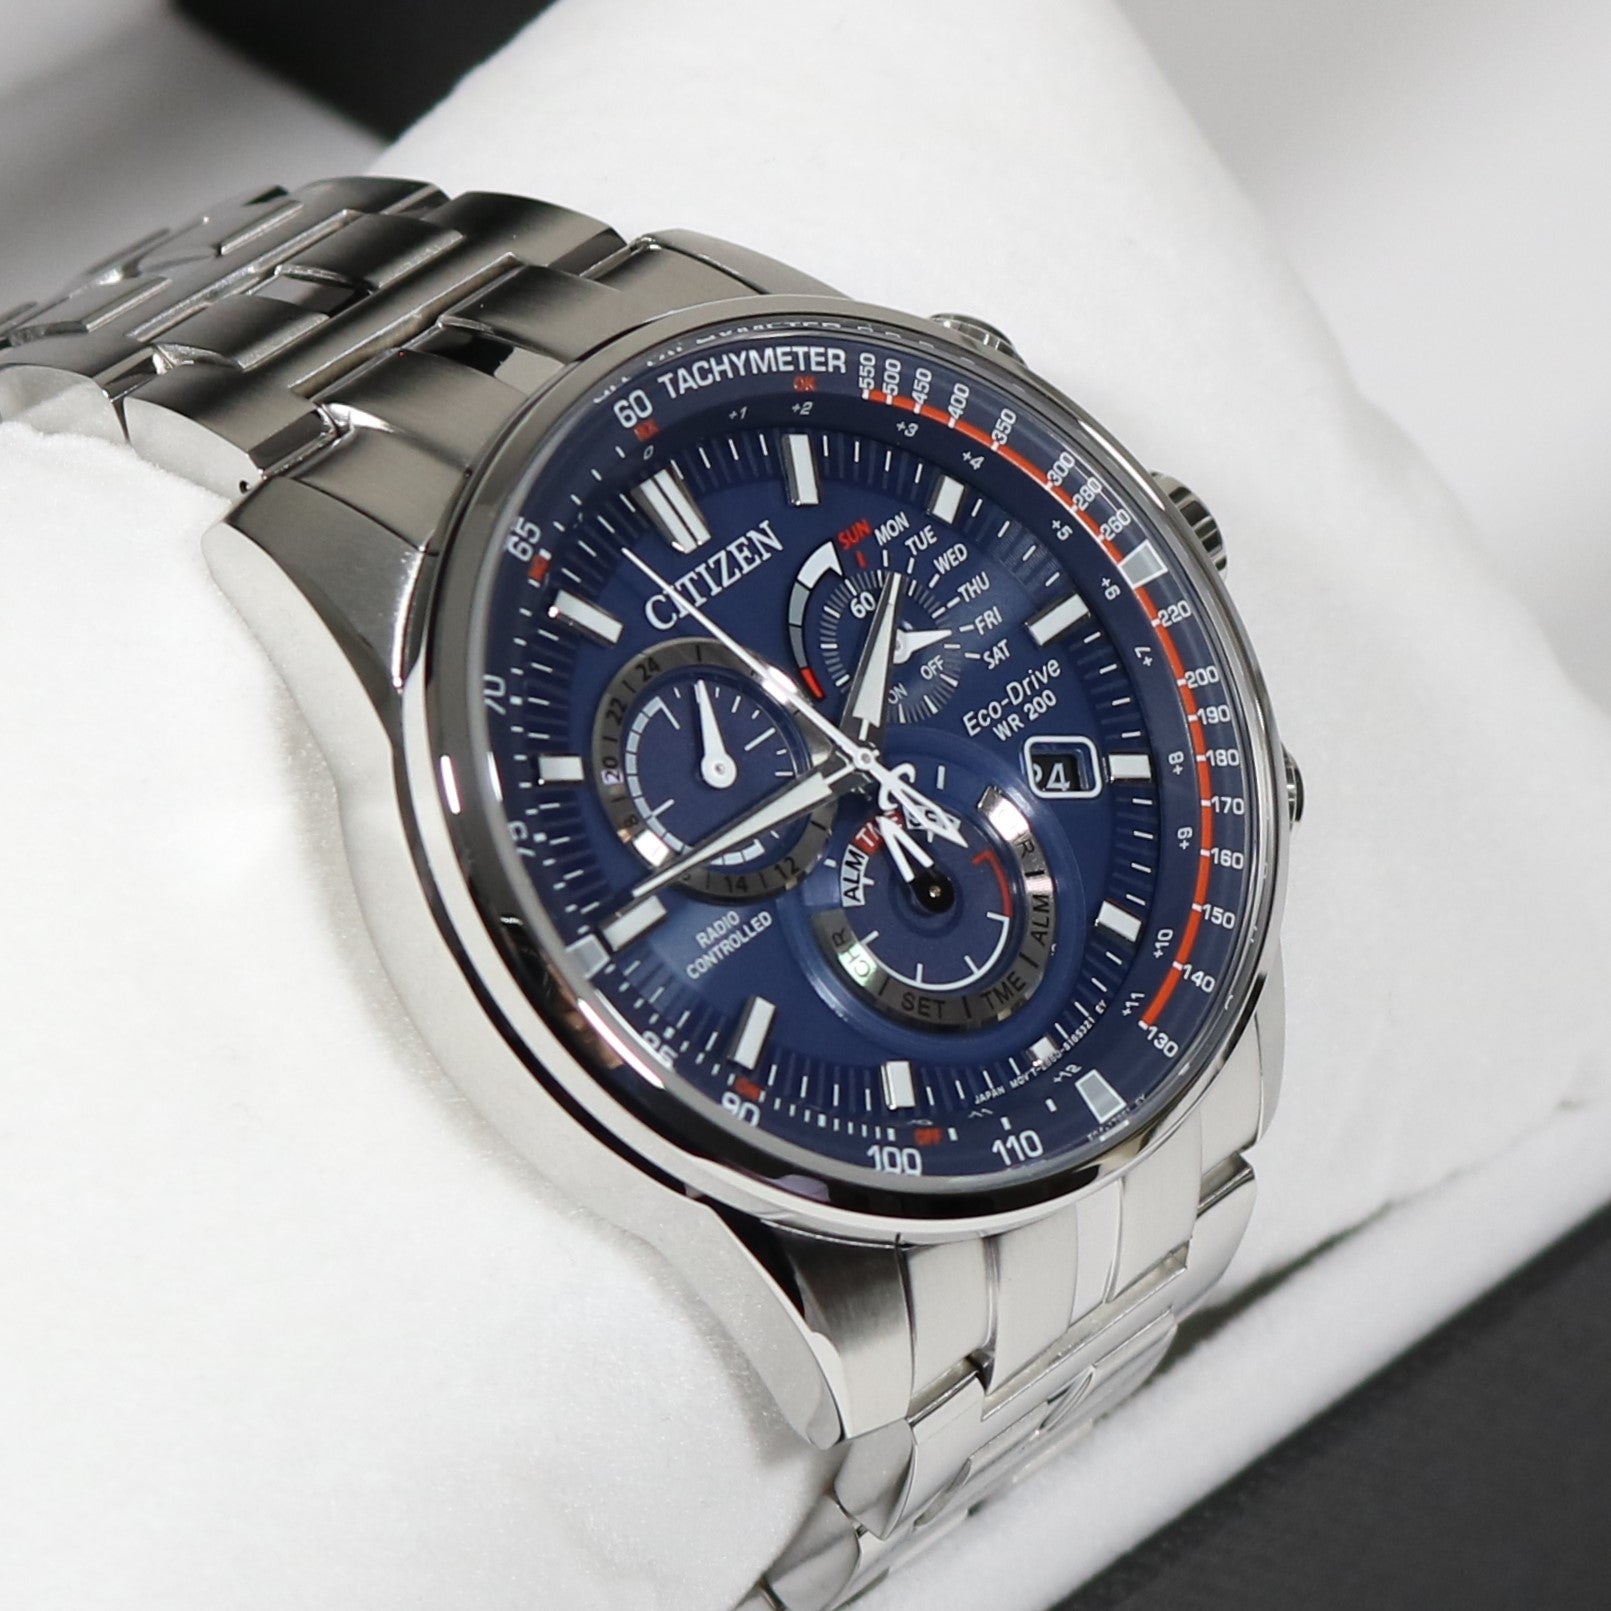 Citizen Eco-Drive PCAT Controlled – Chronobuy CB5880-5 Chronograph Watch Dial Blue